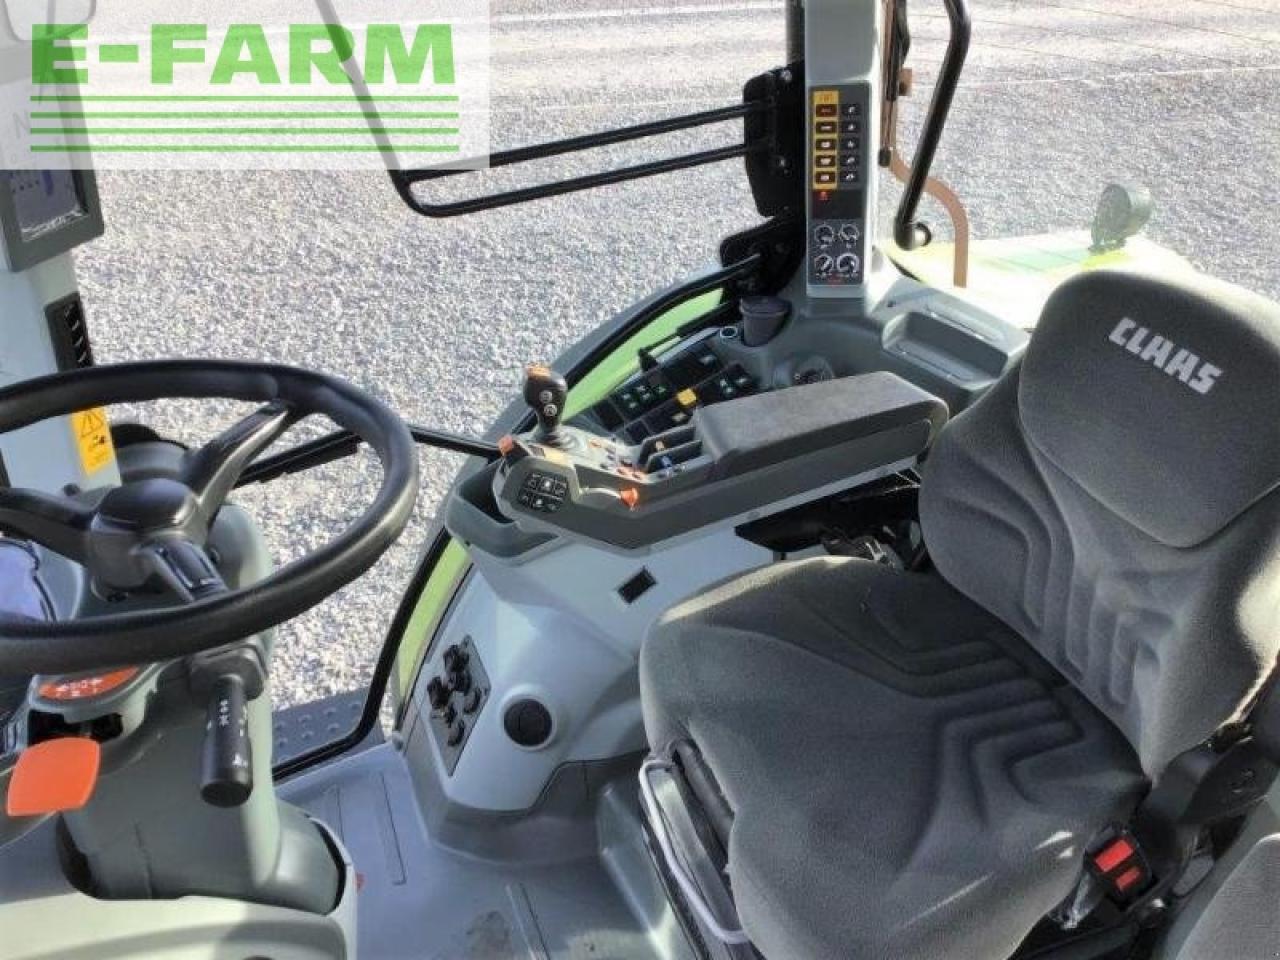 Farm tractor CLAAS arion 630 hexa stage v